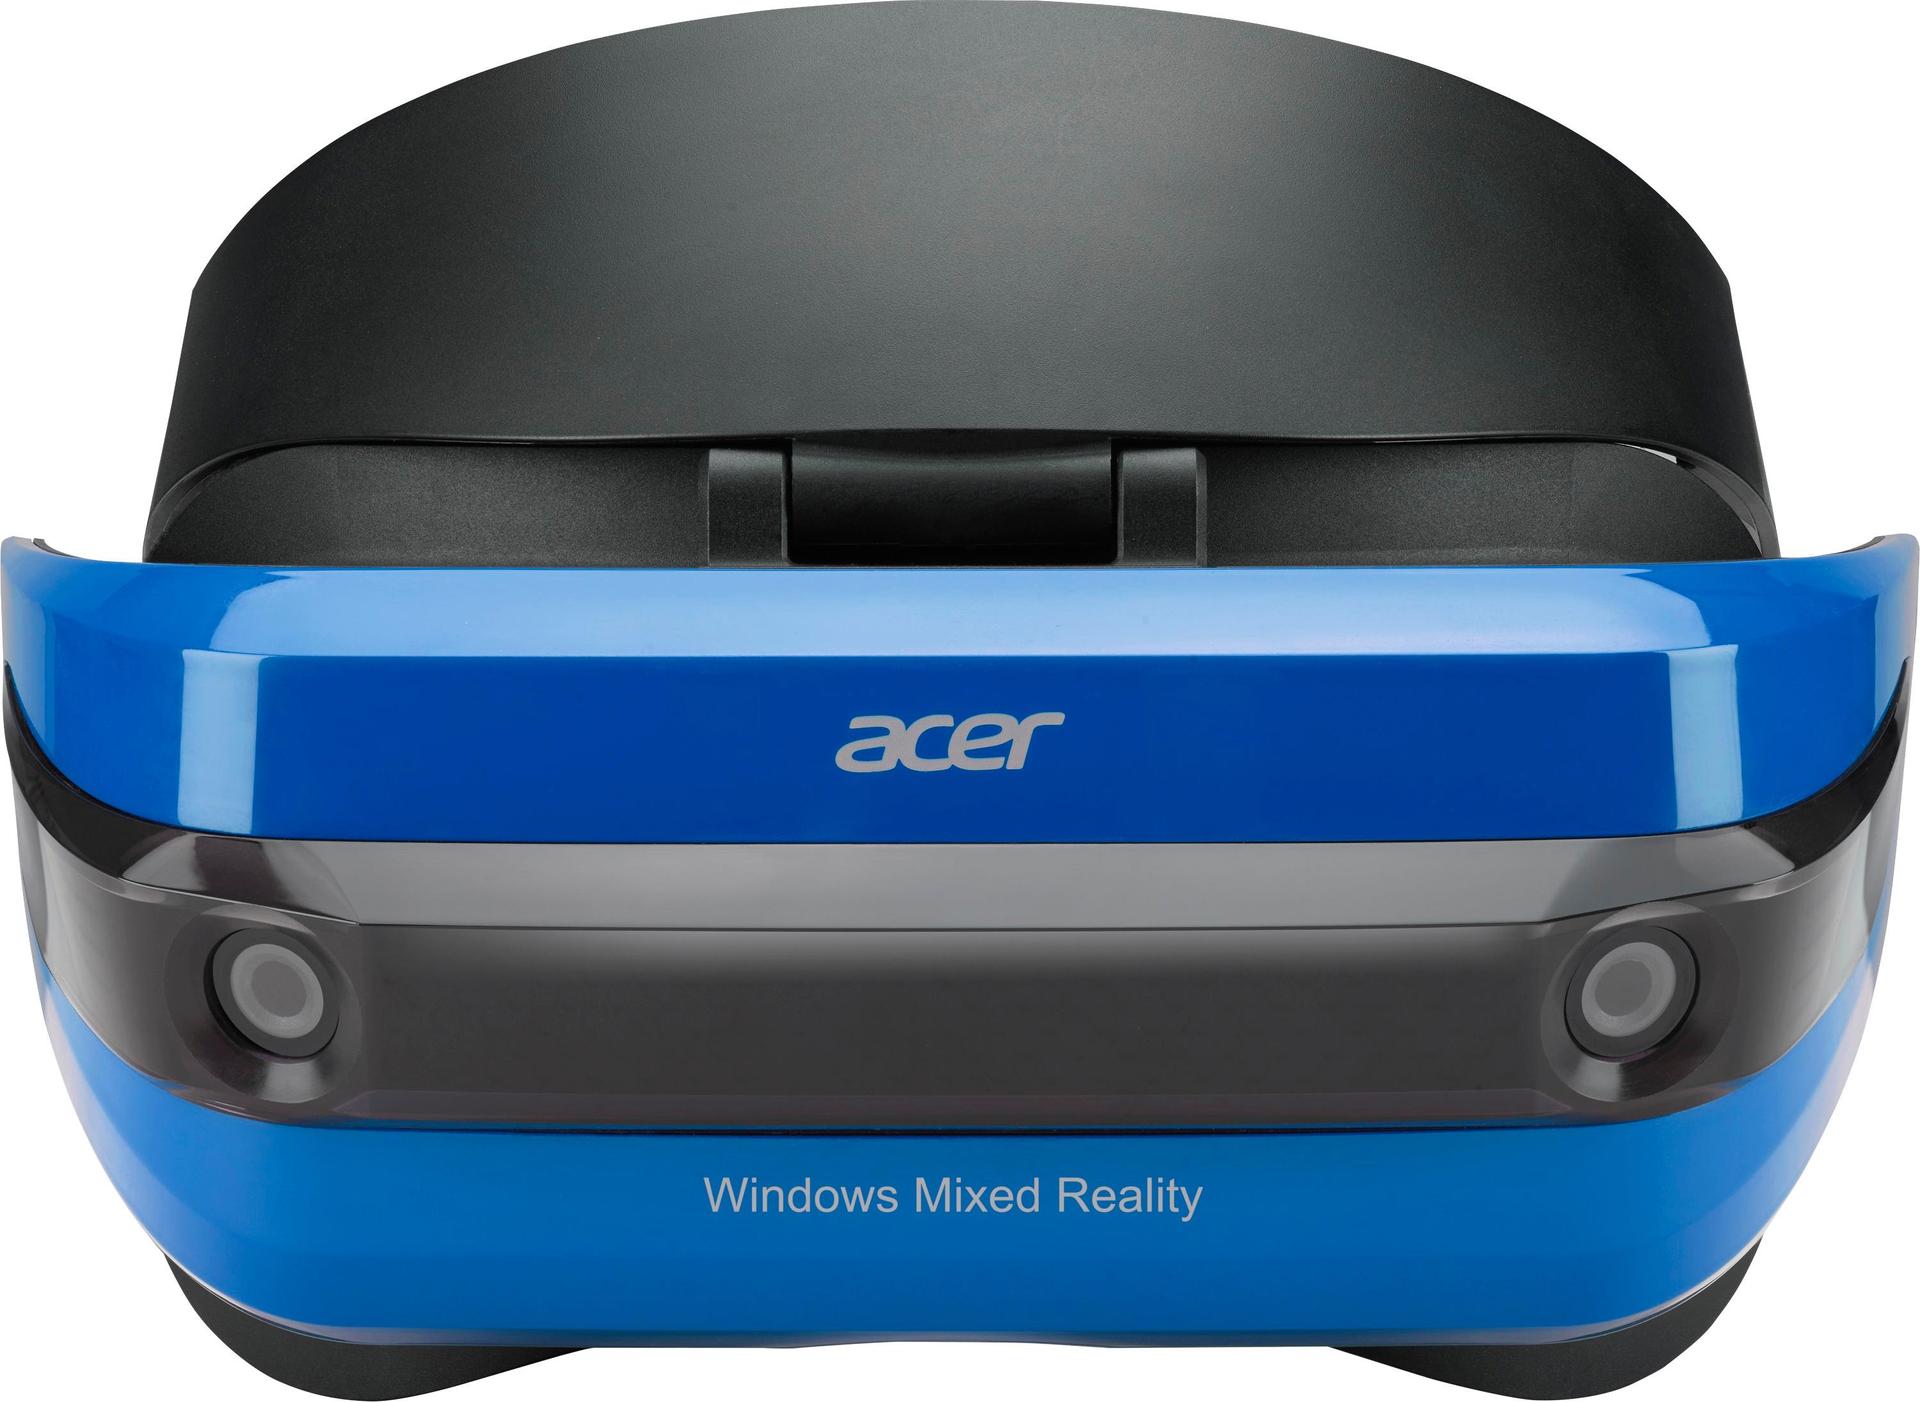 Final Thoughts about the MS/Acer VR headset (I refuse to call it Mixed Reality)